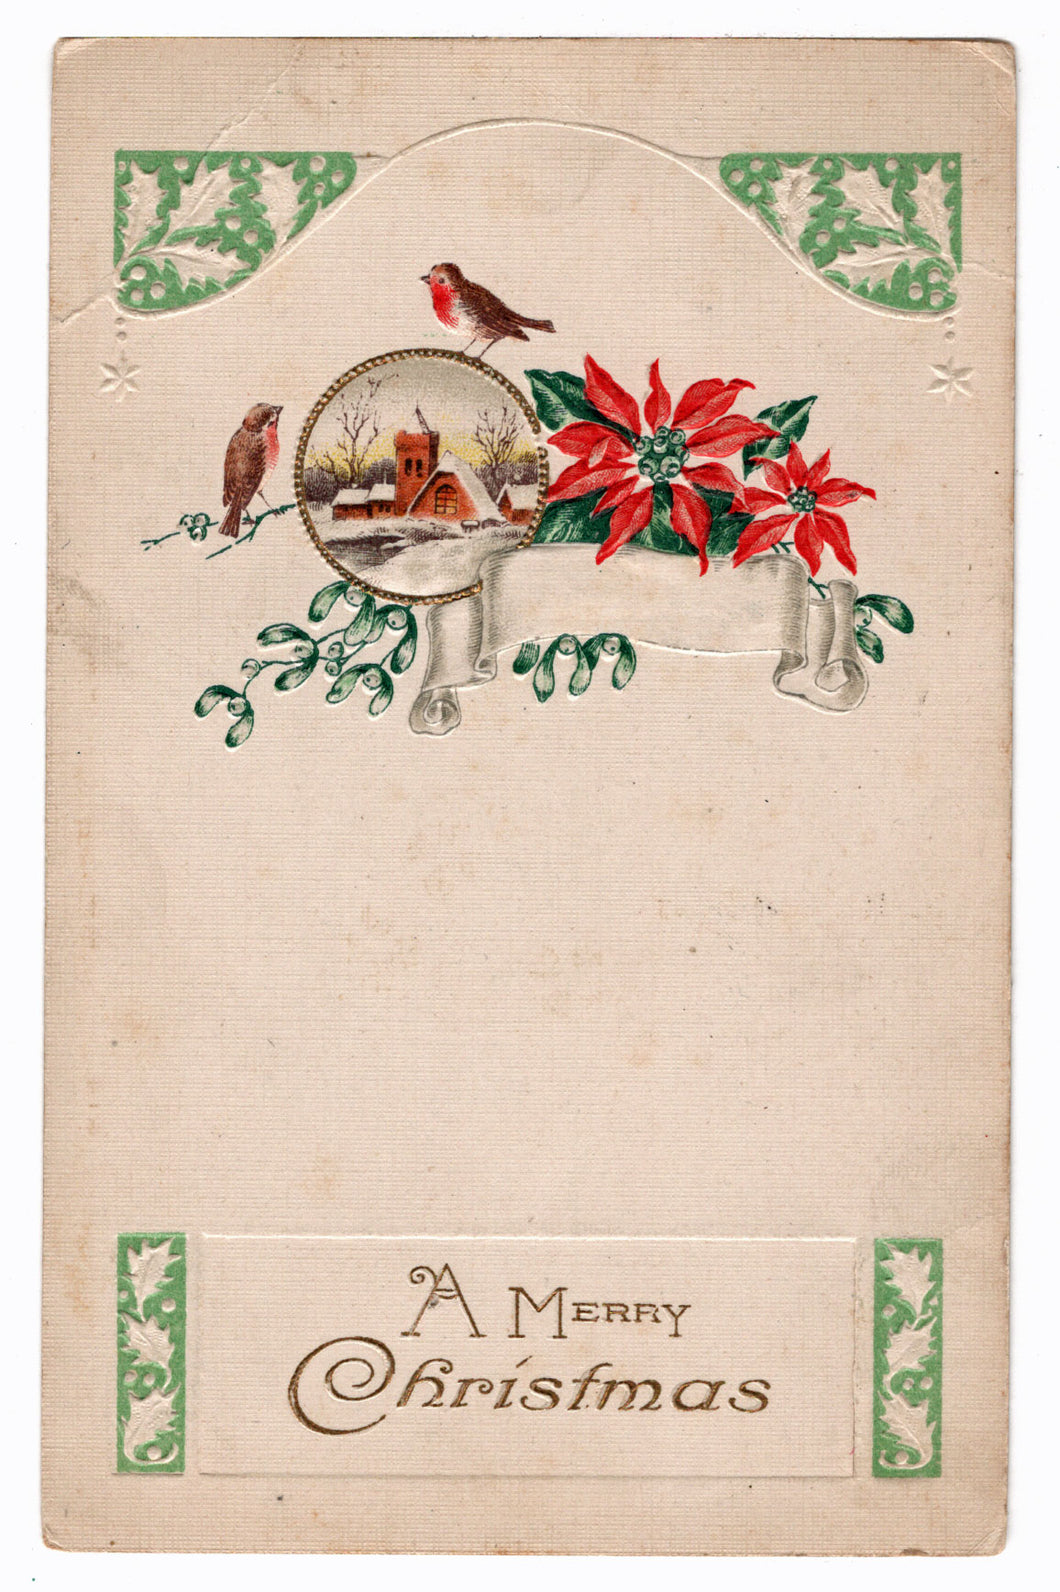 A Merry Christmas Vintage Original Postcard # 4721 - Post Marked Early 1900's